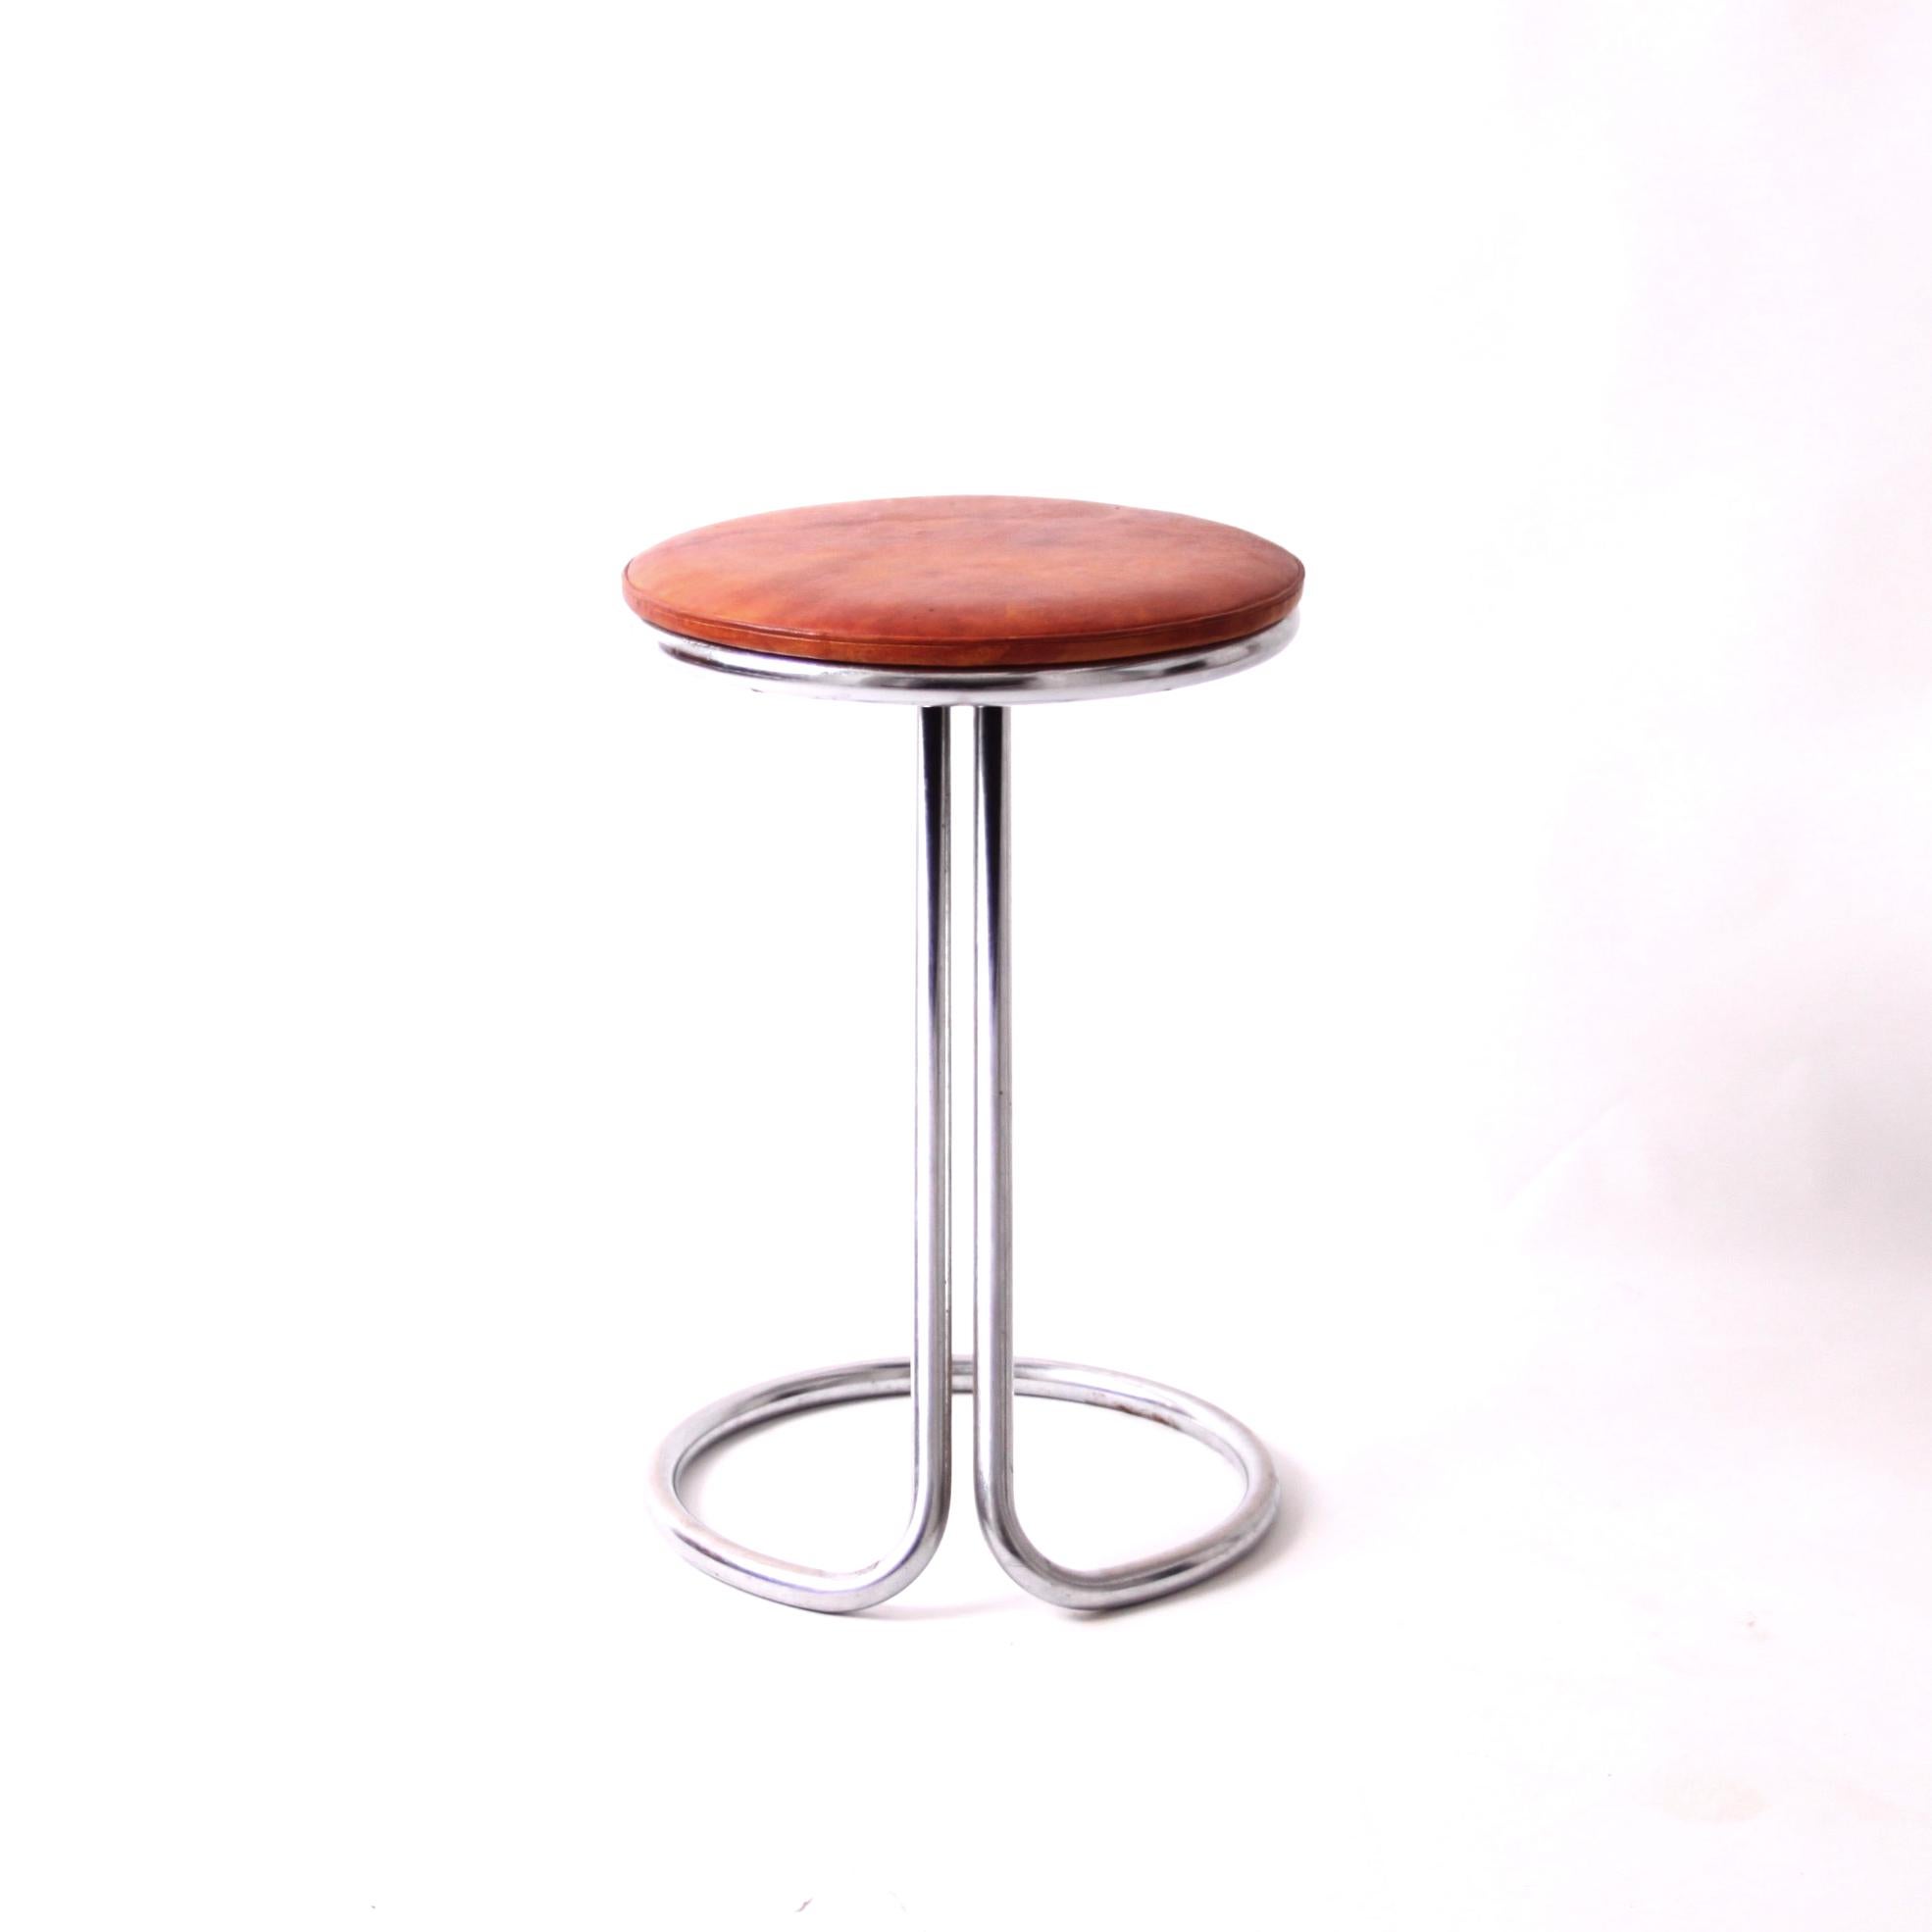 The piano stool was designed by Gilbert Rohde. 

The stool can be used traditionally or as a bedside table, as the surface is very firm. 

The base is tubular chromium-plated steel and the seat is upholstered with patinated Niger leather. 

Very